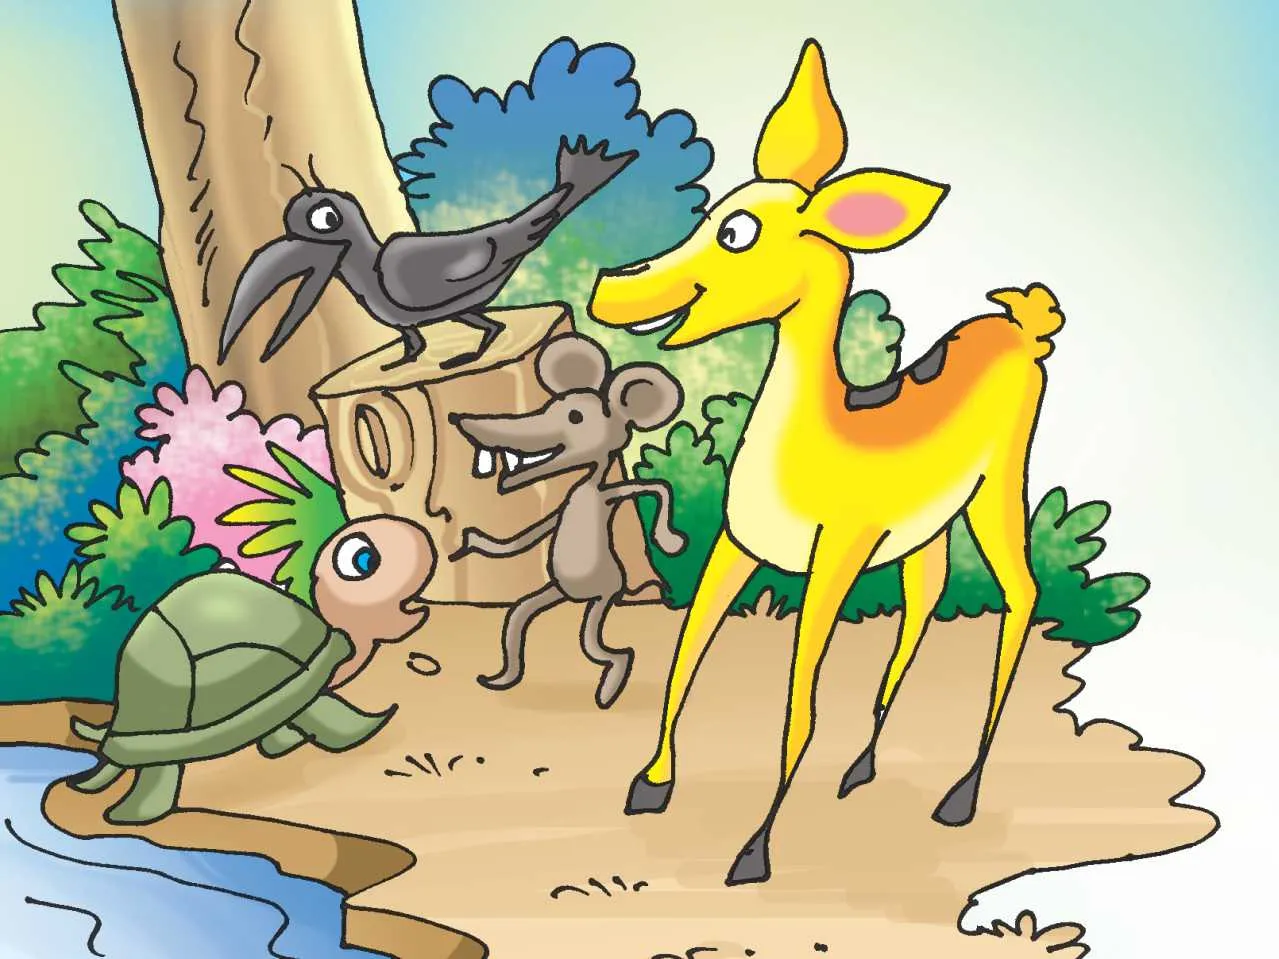 Crow, mouse, turtle and deer cartoon image